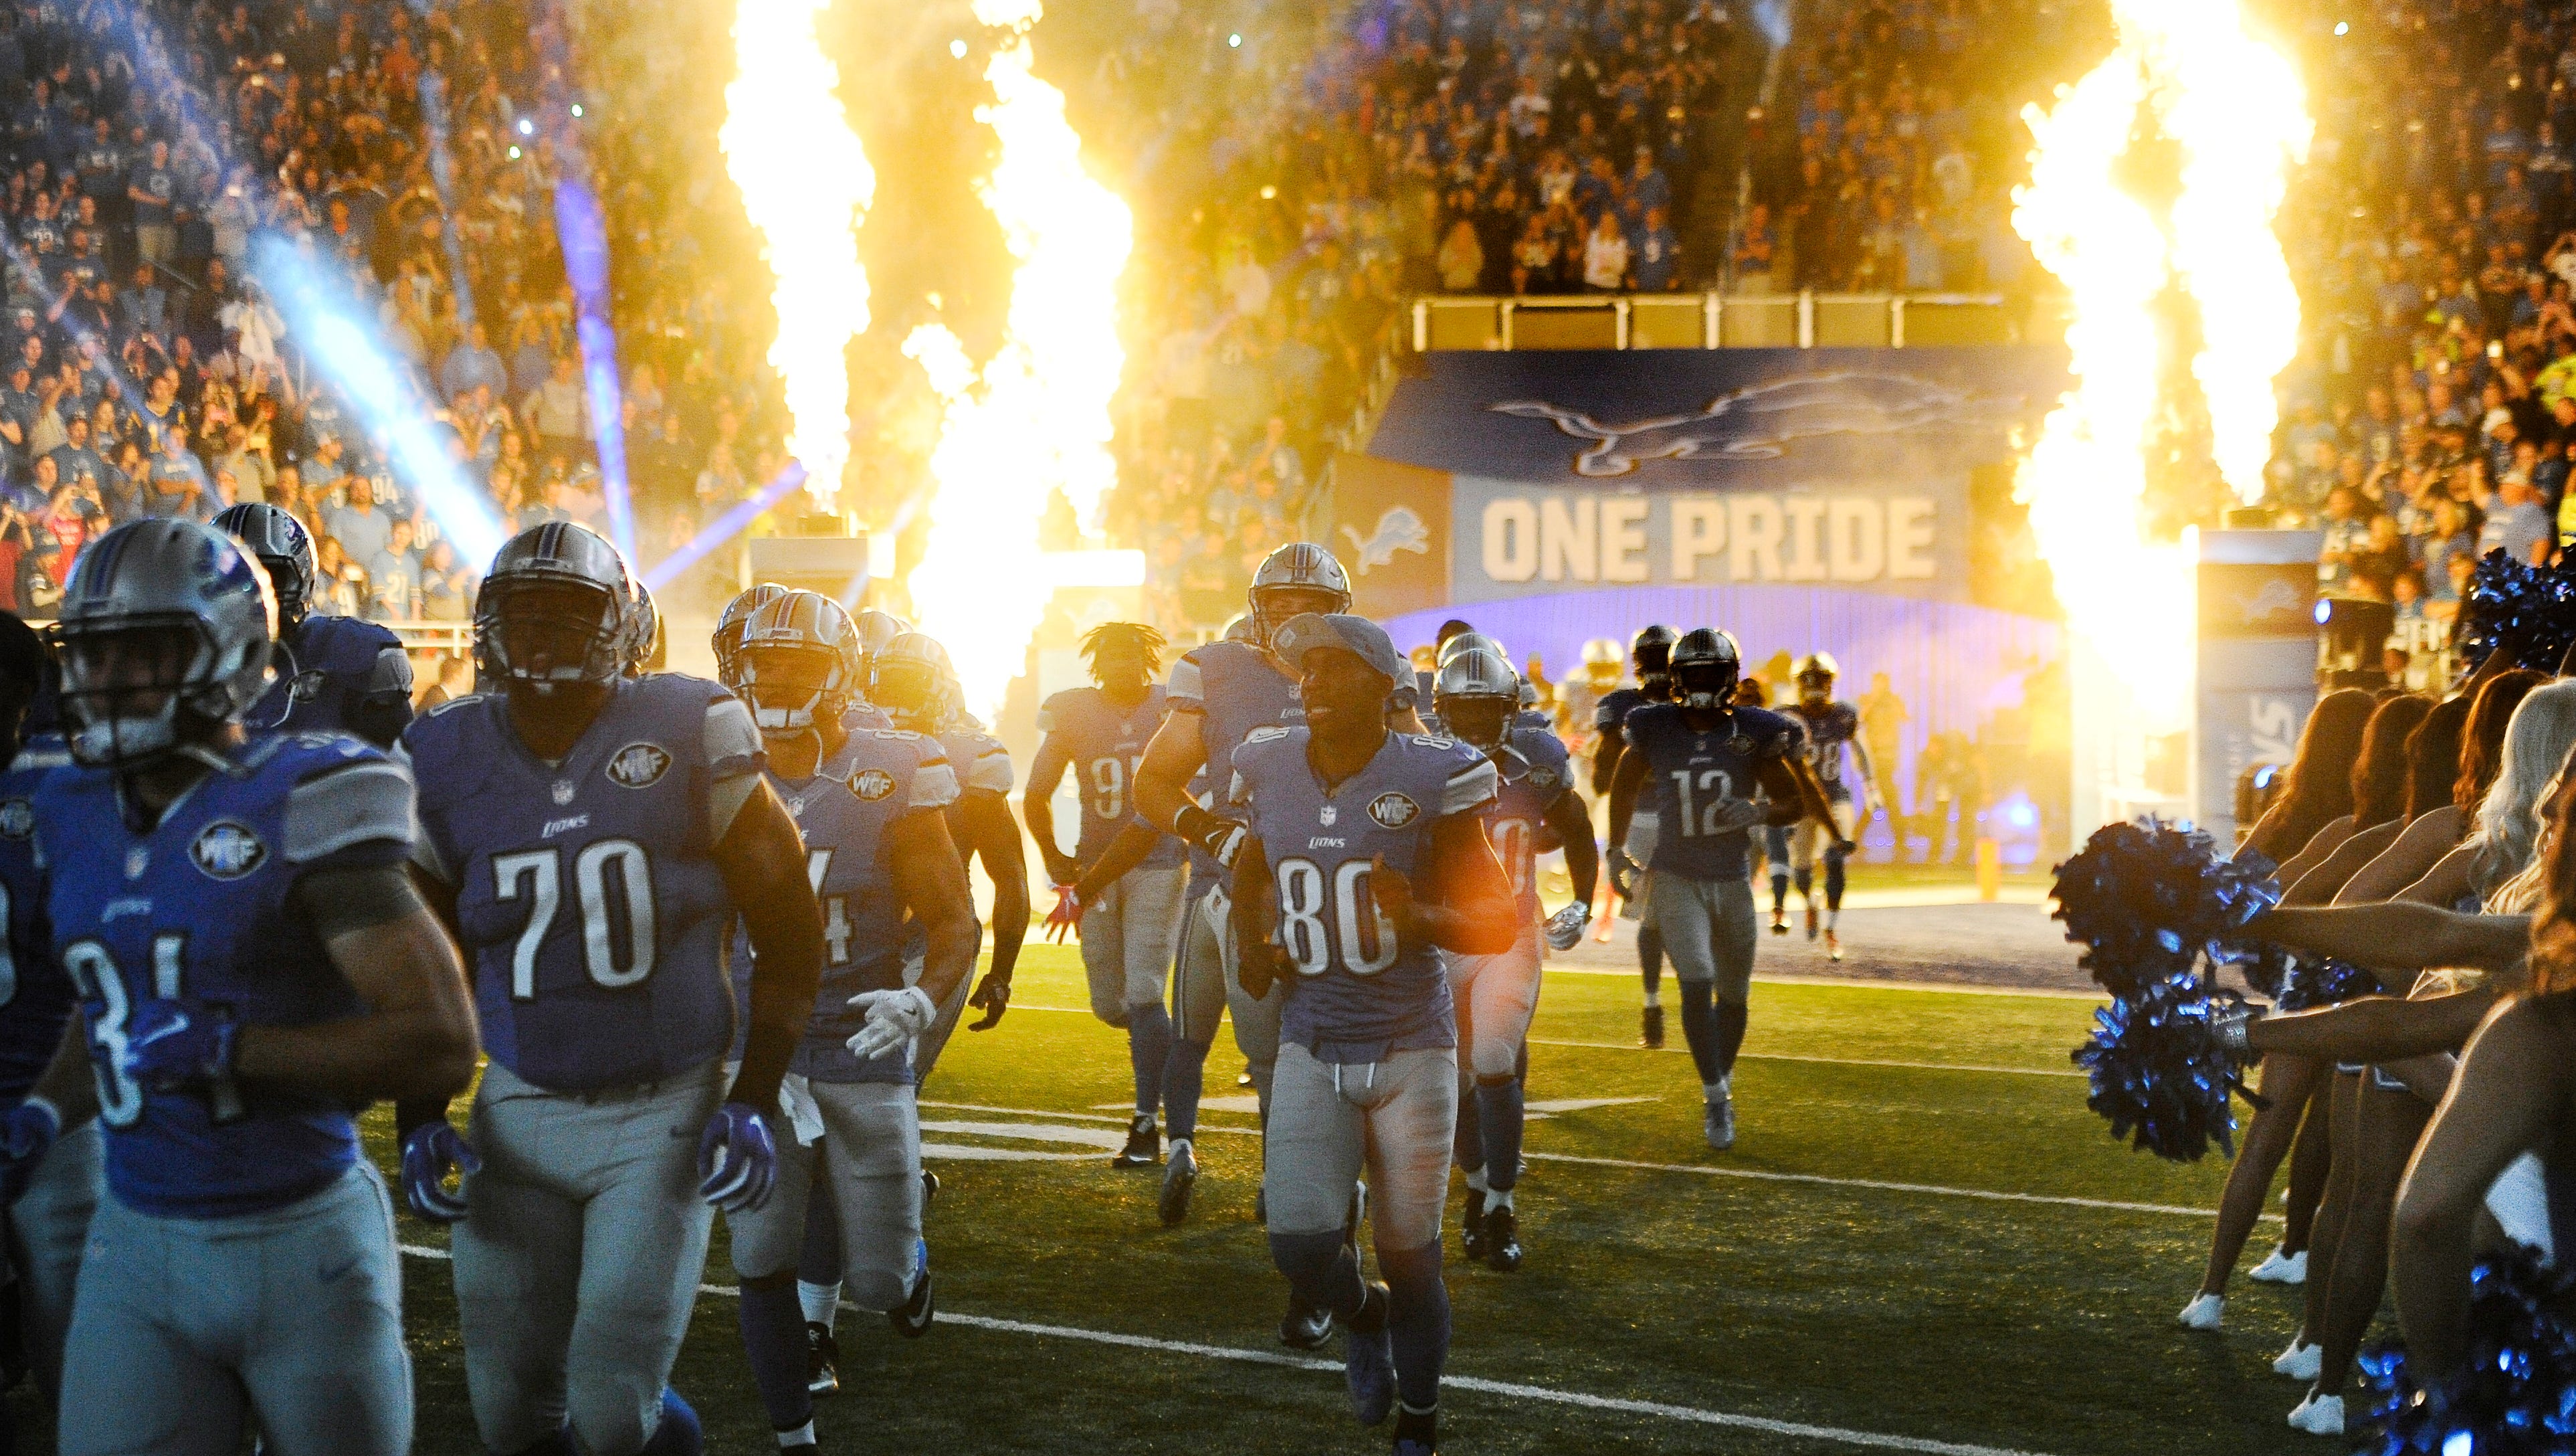 The Detroit Lions make their way onto the field before playing the Los Angeles Rams at Ford Field.